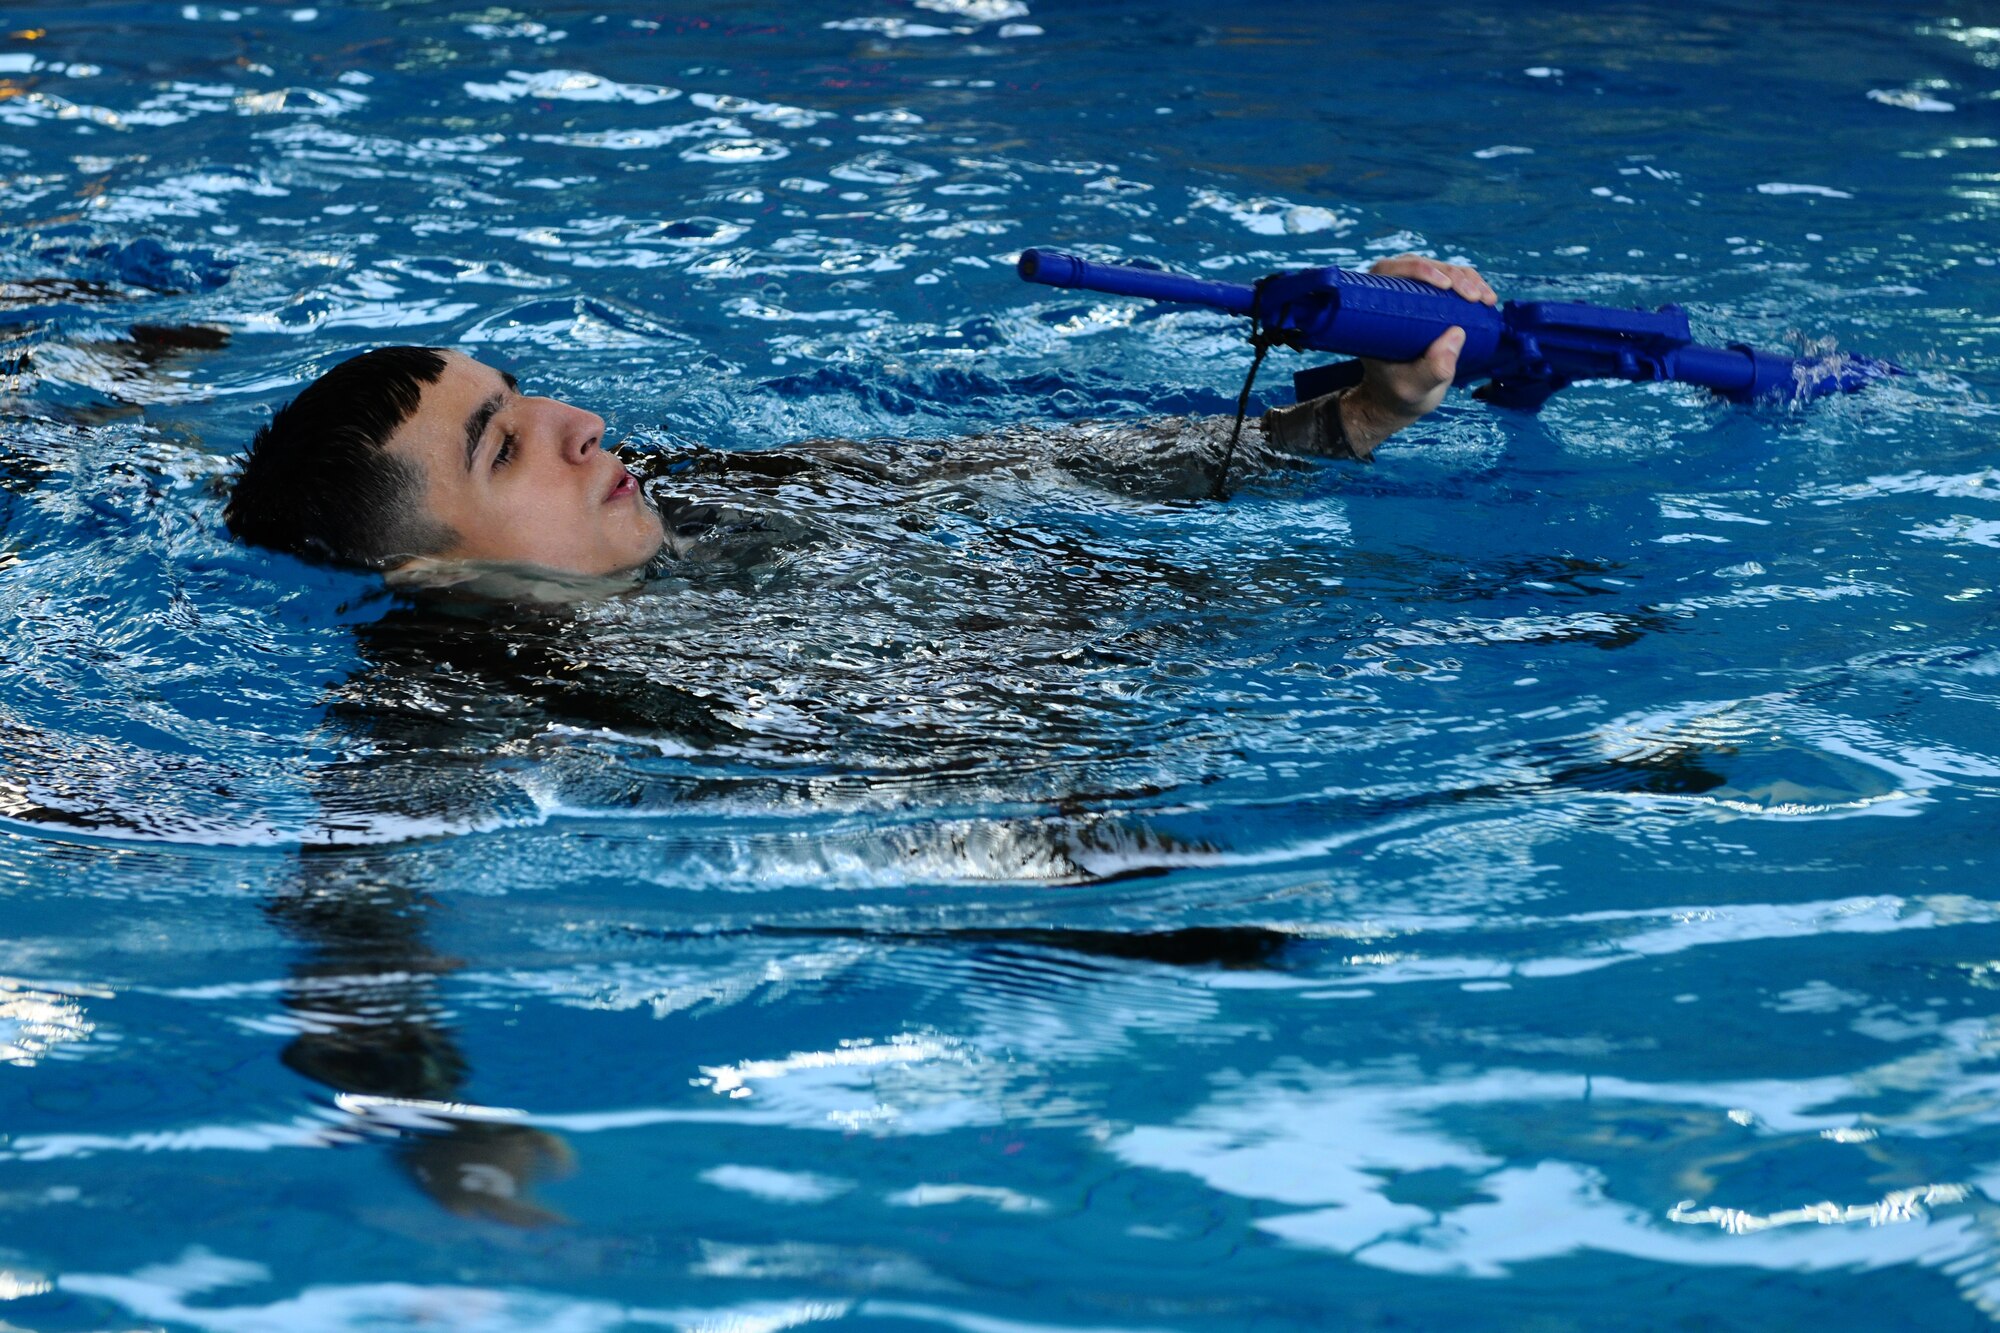 RAMSTEIN AIR BASE, Germany – Staff Sgt. Edgar Corona, 52nd Medical Operations Squadron, swims 15 meters while keeping his rifle above water during the water survival training portion of the Ranger training course inside the Ramstein Aquatic Center here March 2. The required three-day course prepares Airmen for what they will be tested on during the U.S. Army Ranger pre-assessment training course. The pre-assessment course includes water survival training, which takes place at Ramstein AB, as well as ruck marching and battle survival tactics that took place at Spangdahlem AB. Out of the five Airmen enrolled in the training, Senior Airman Sean Reval, 52nd Security Forces Squadron, and Senior Airman Coty Raphael, 52nd Medical Operations Squadron, were the only participants to qualify to continue on to Ranger pre-assessment training at Sembach Air Base, Germany. (U.S. Air Force photo by Airman 1st Class Dillon Davis/Released)